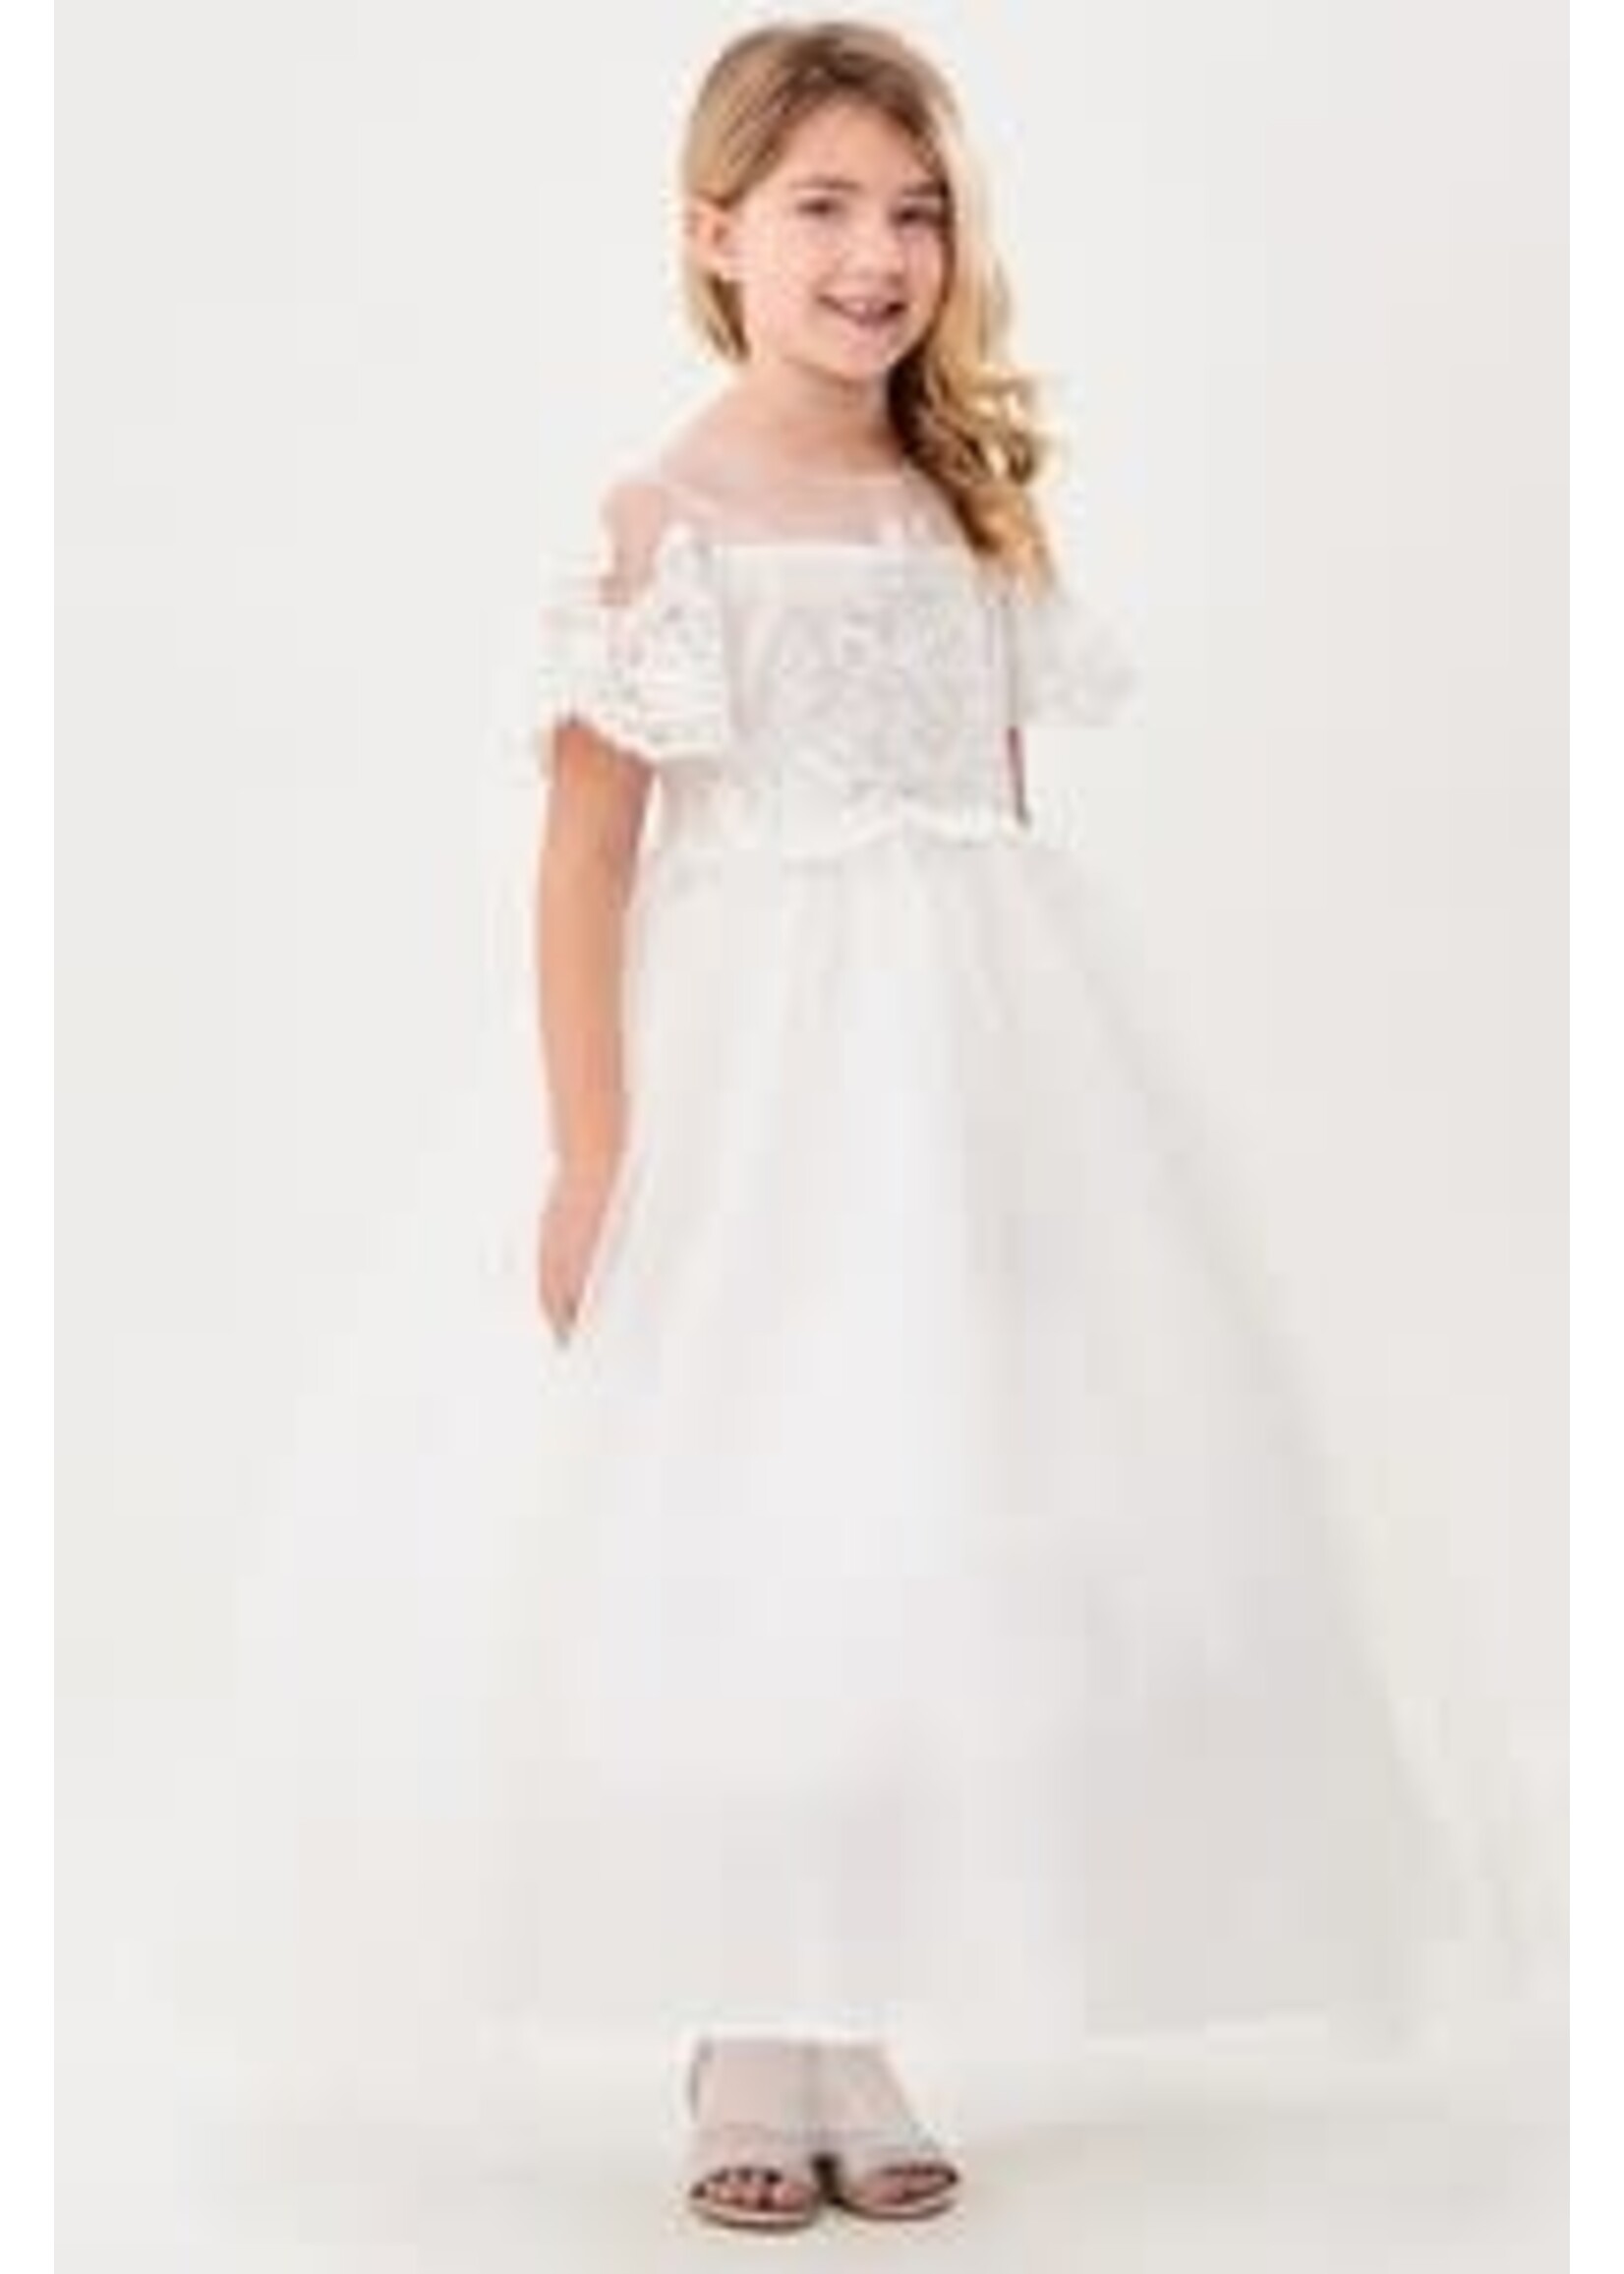 GG3588 - HOLY COMMUNION GOWN: 3/4 MESH SLEEVE